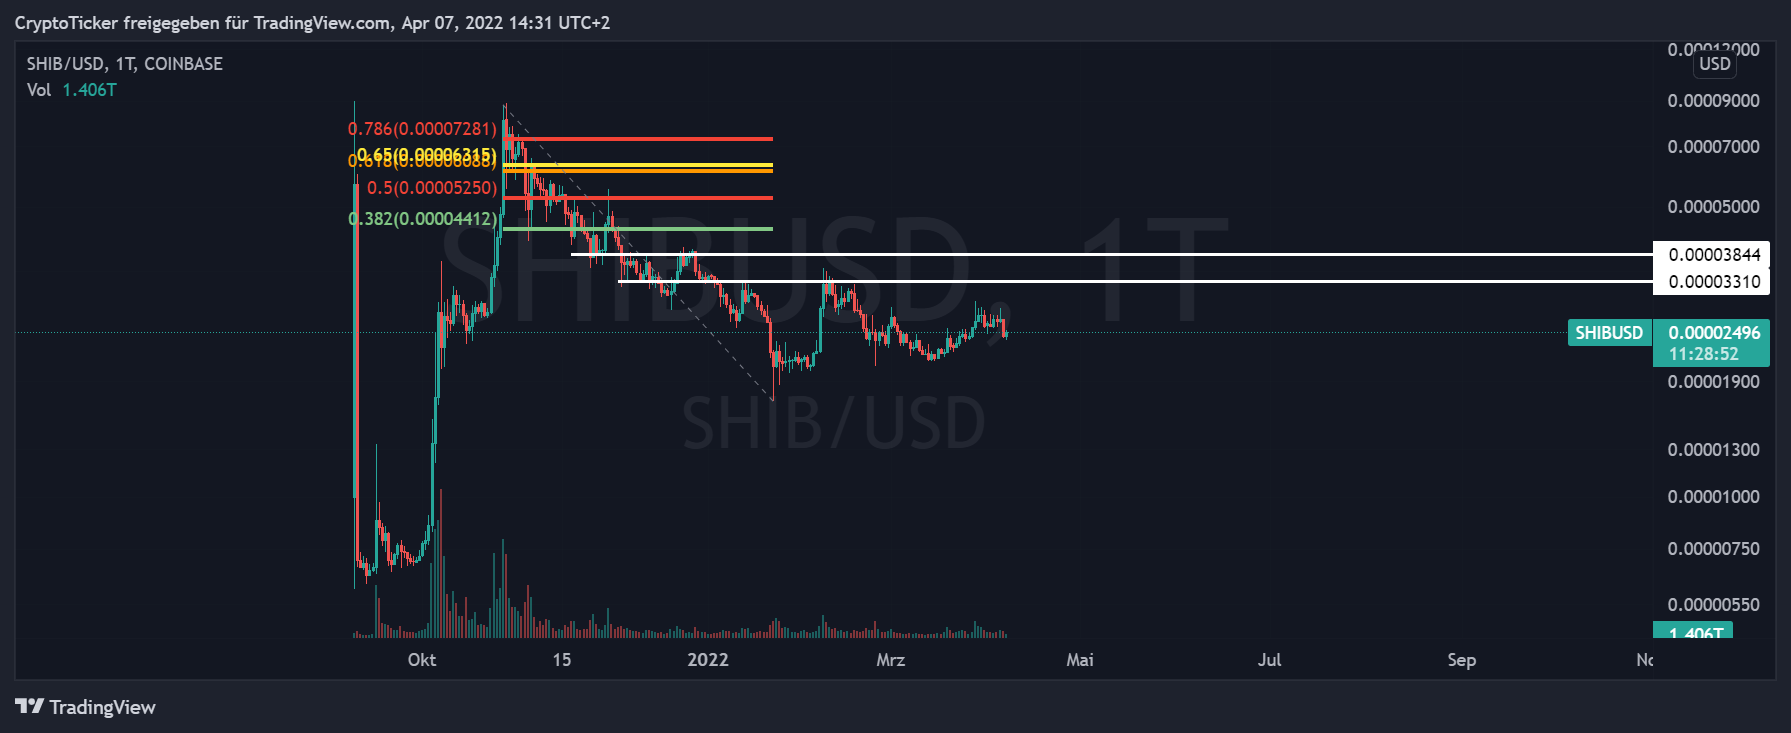 SHIB/USD 1-day chart showing the potential targets of Shiba inu price